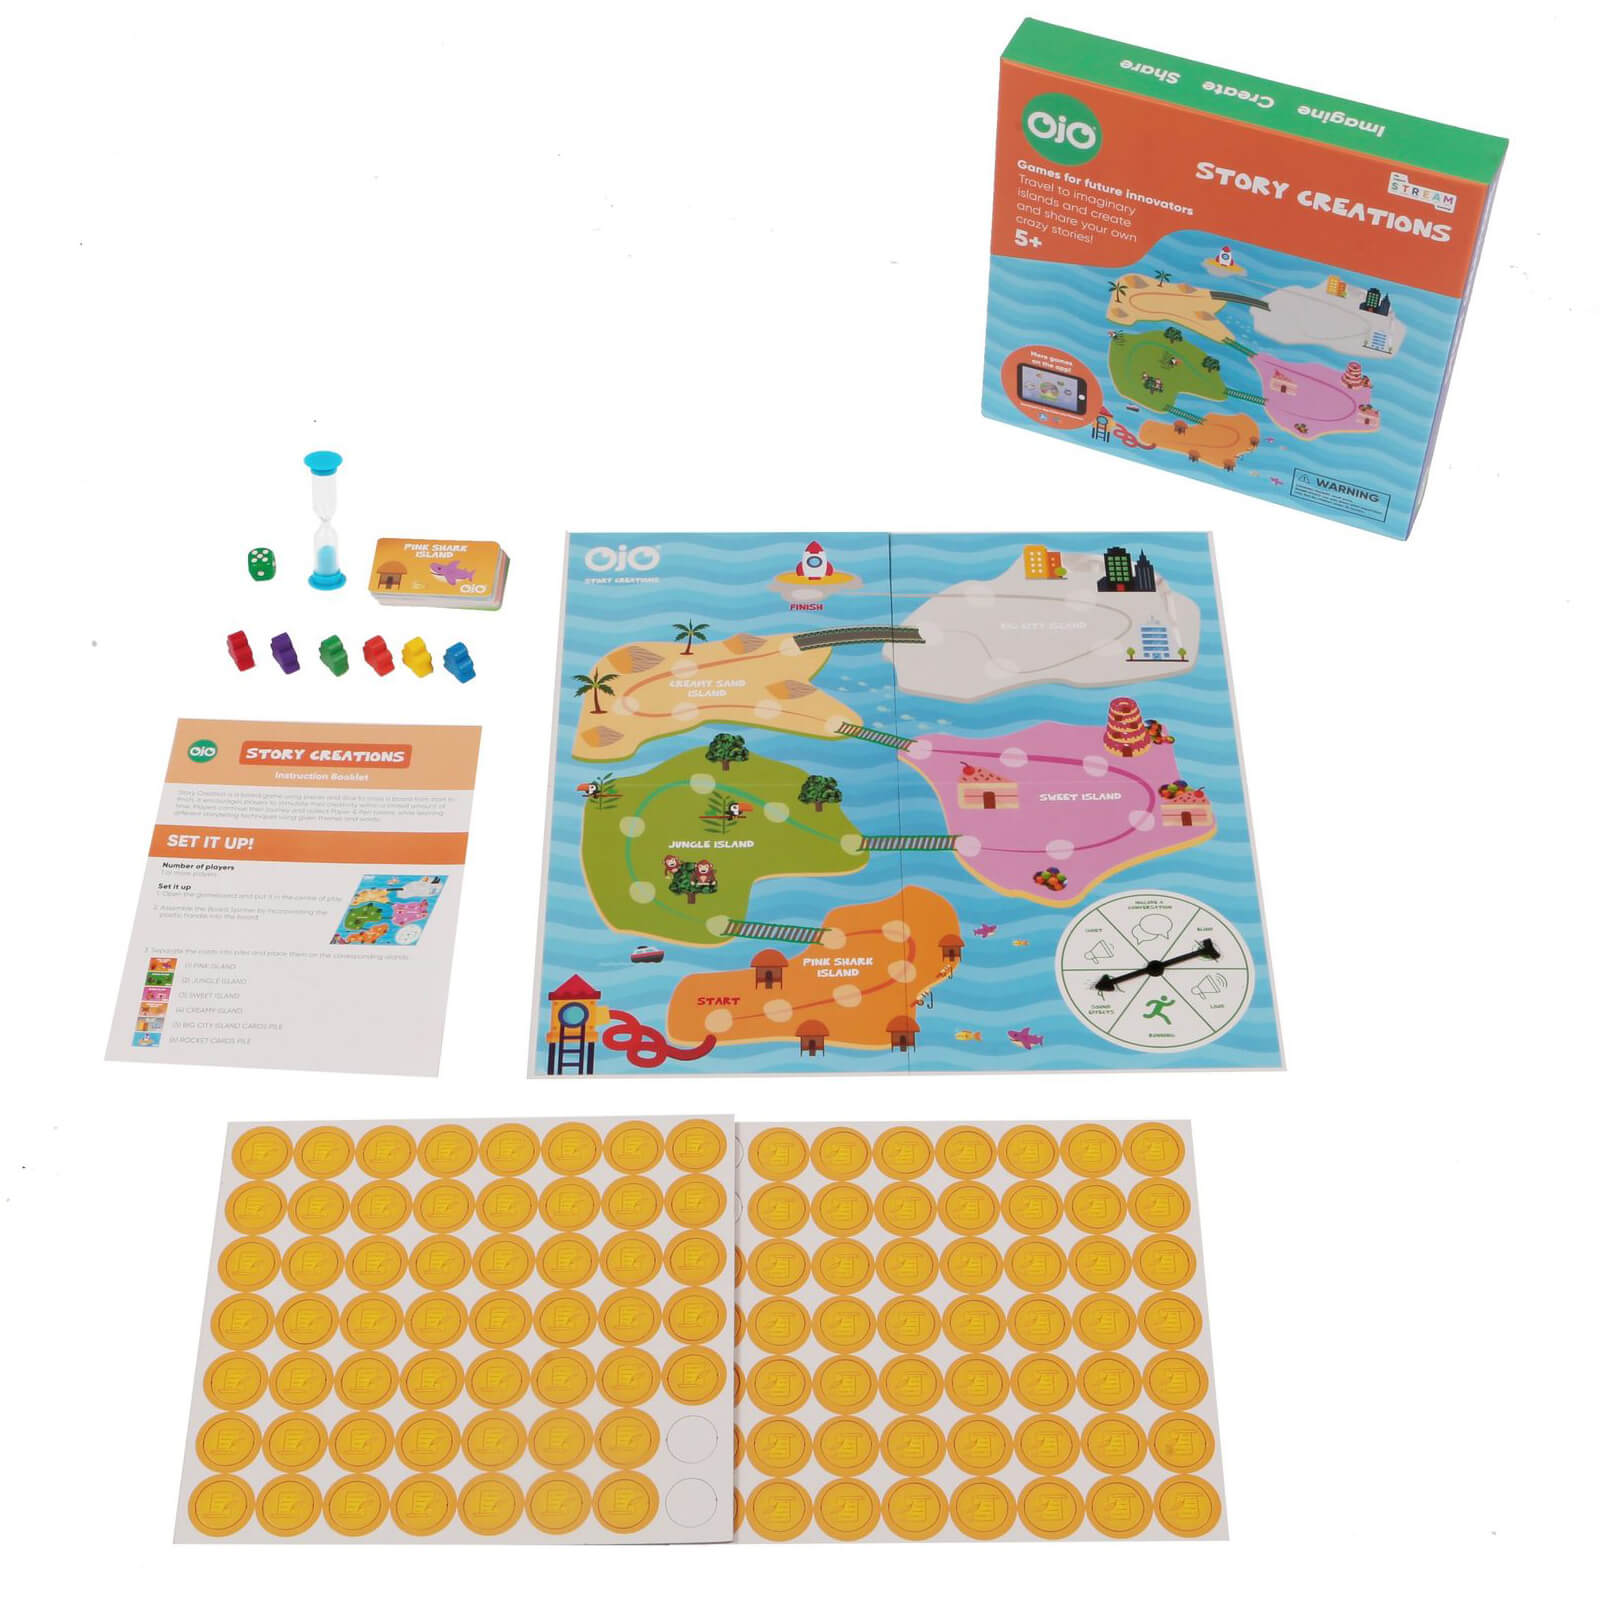 OjO Story Creations Storytelling Board Game